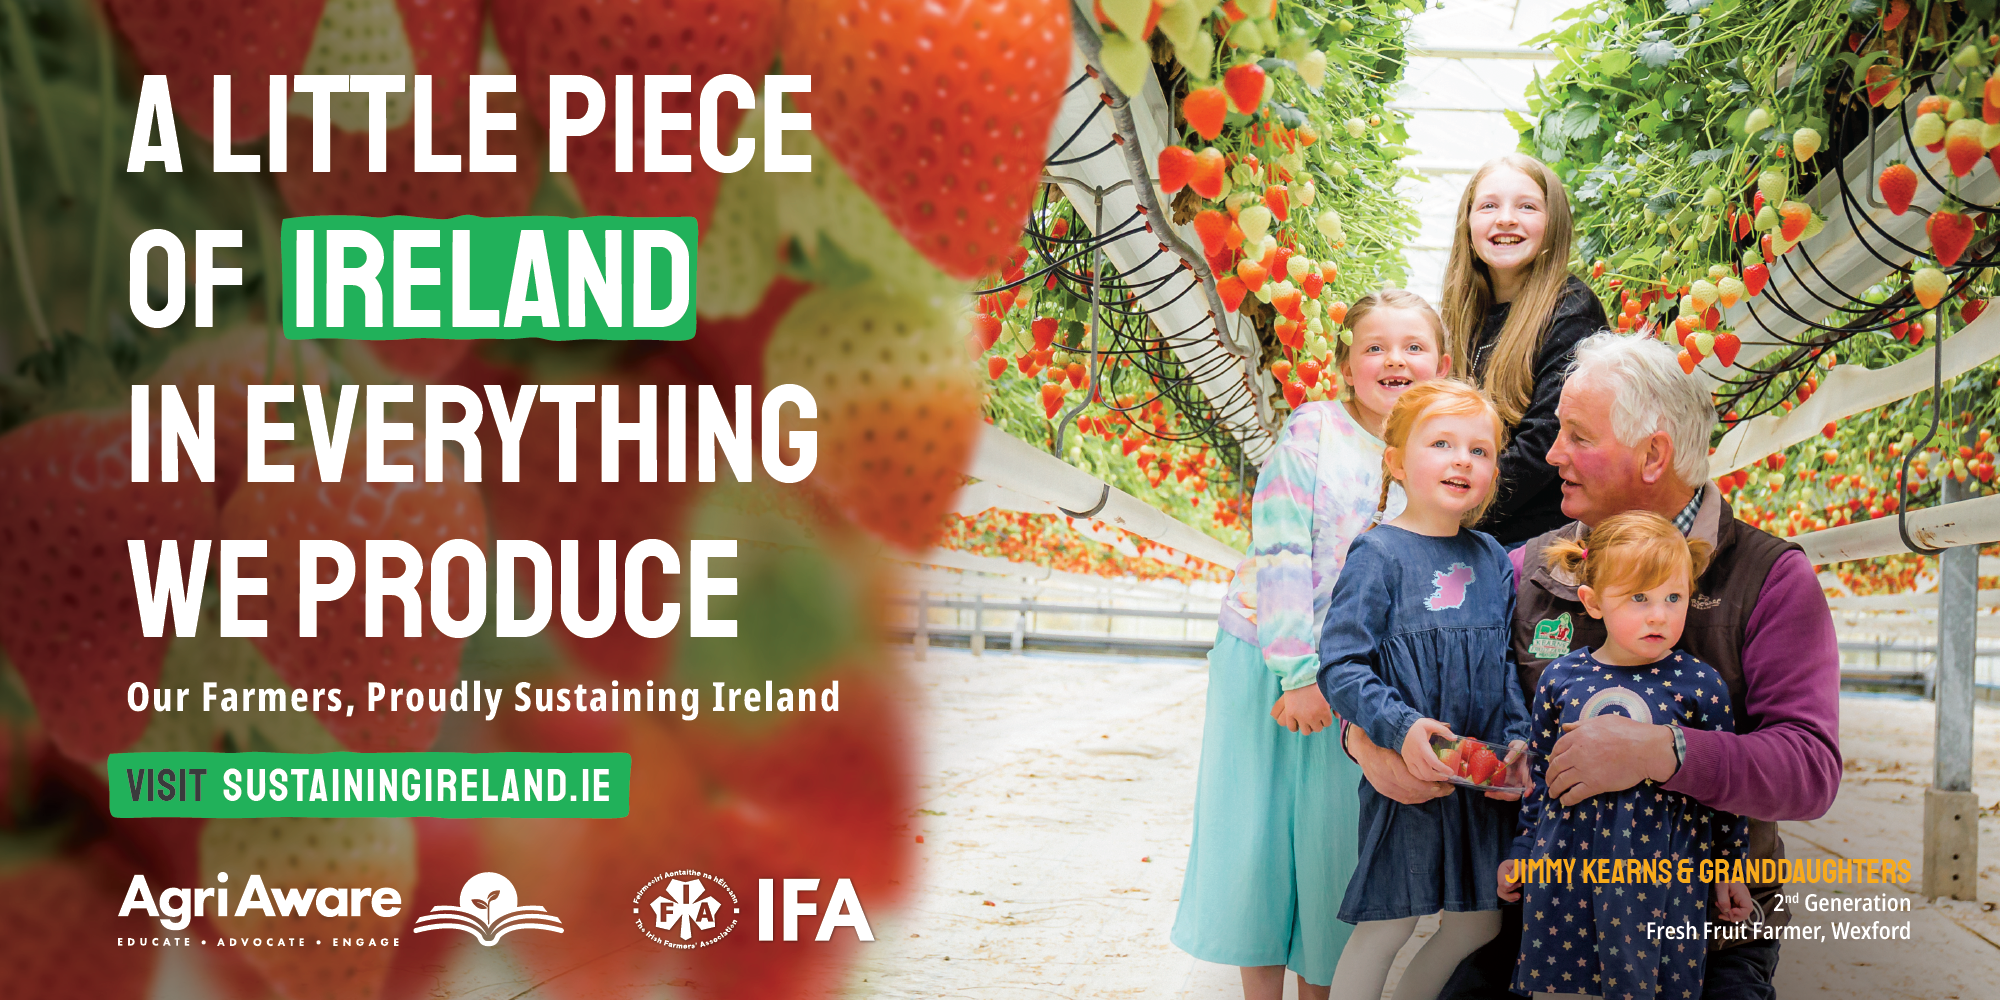 IFA TO HOLD NATIONWIDE RALLY ON FRIDAY TO HIGHLIGHT VALUE OF FARMING TO THE RURAL ECONOMY